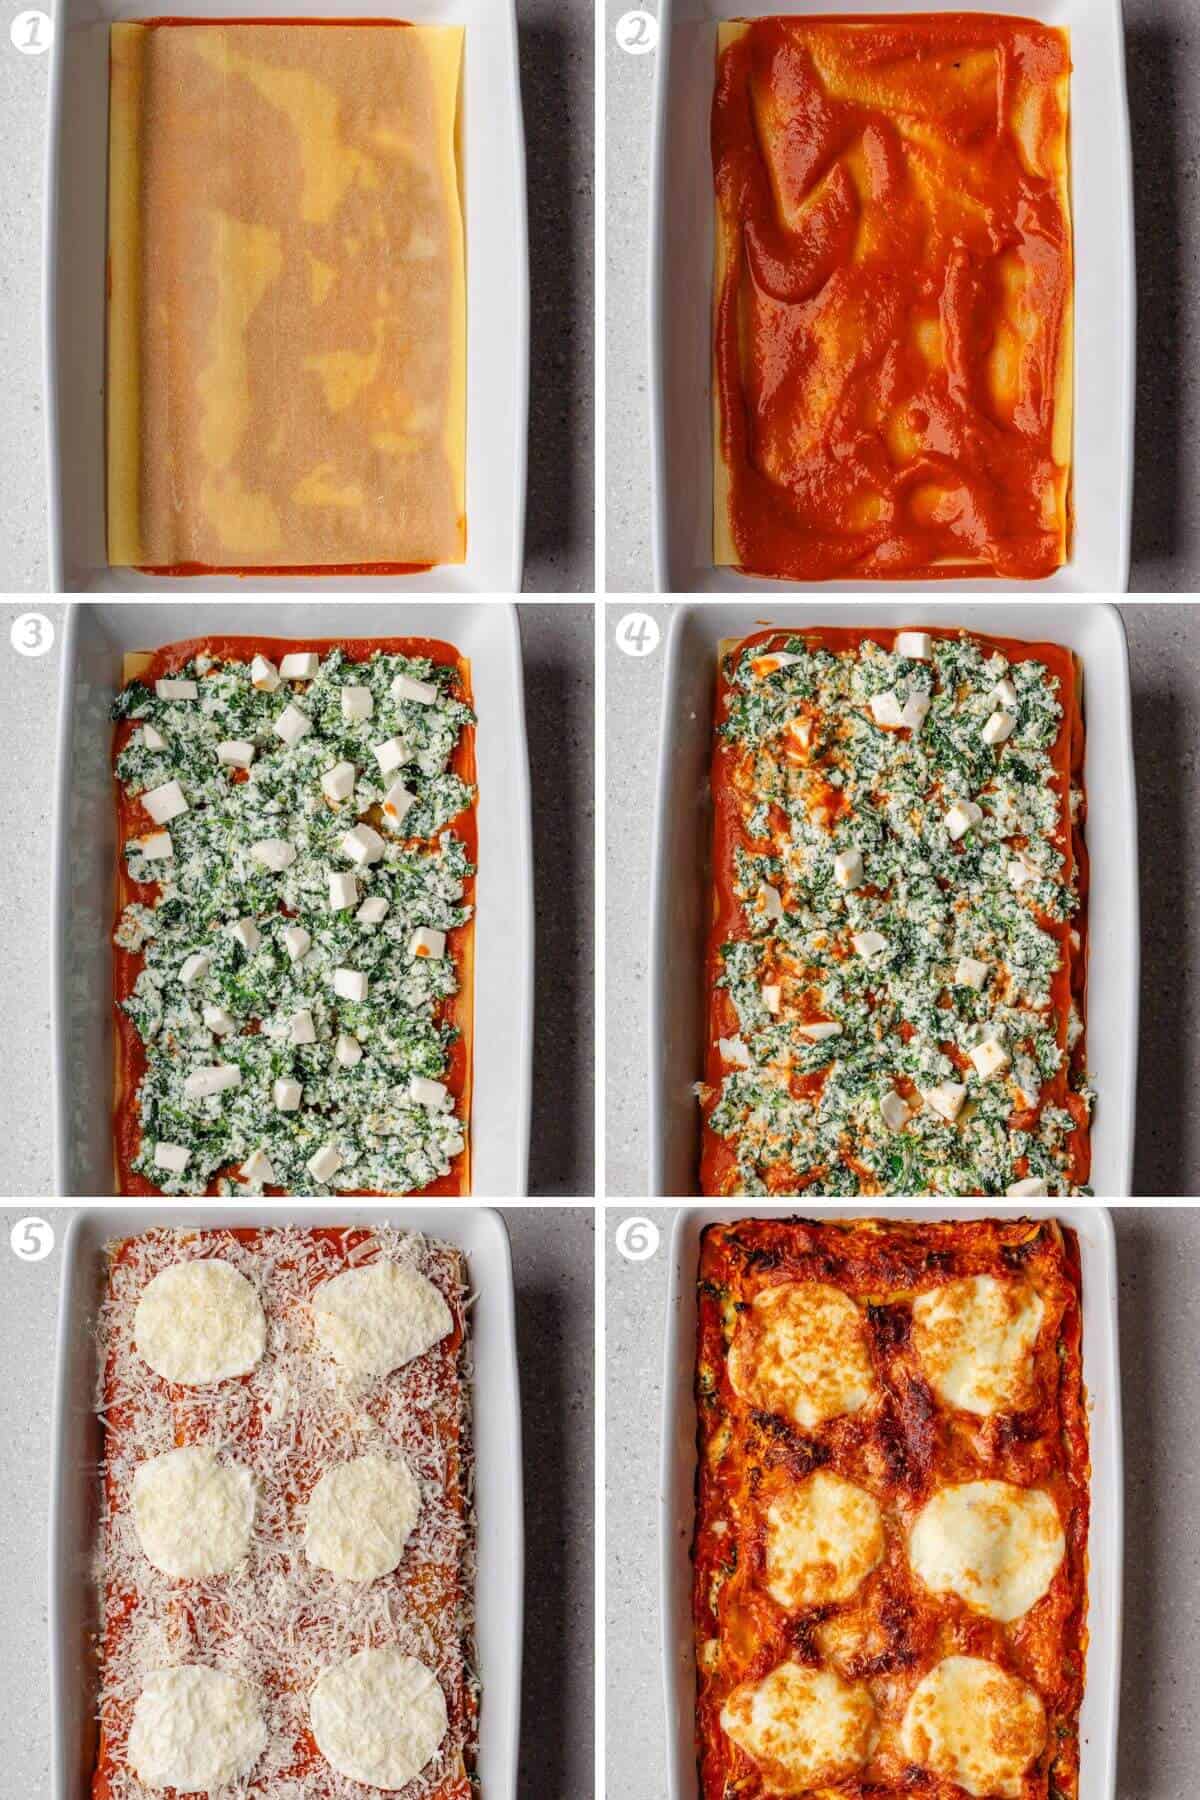 Steps on how to layer spinach lasagna